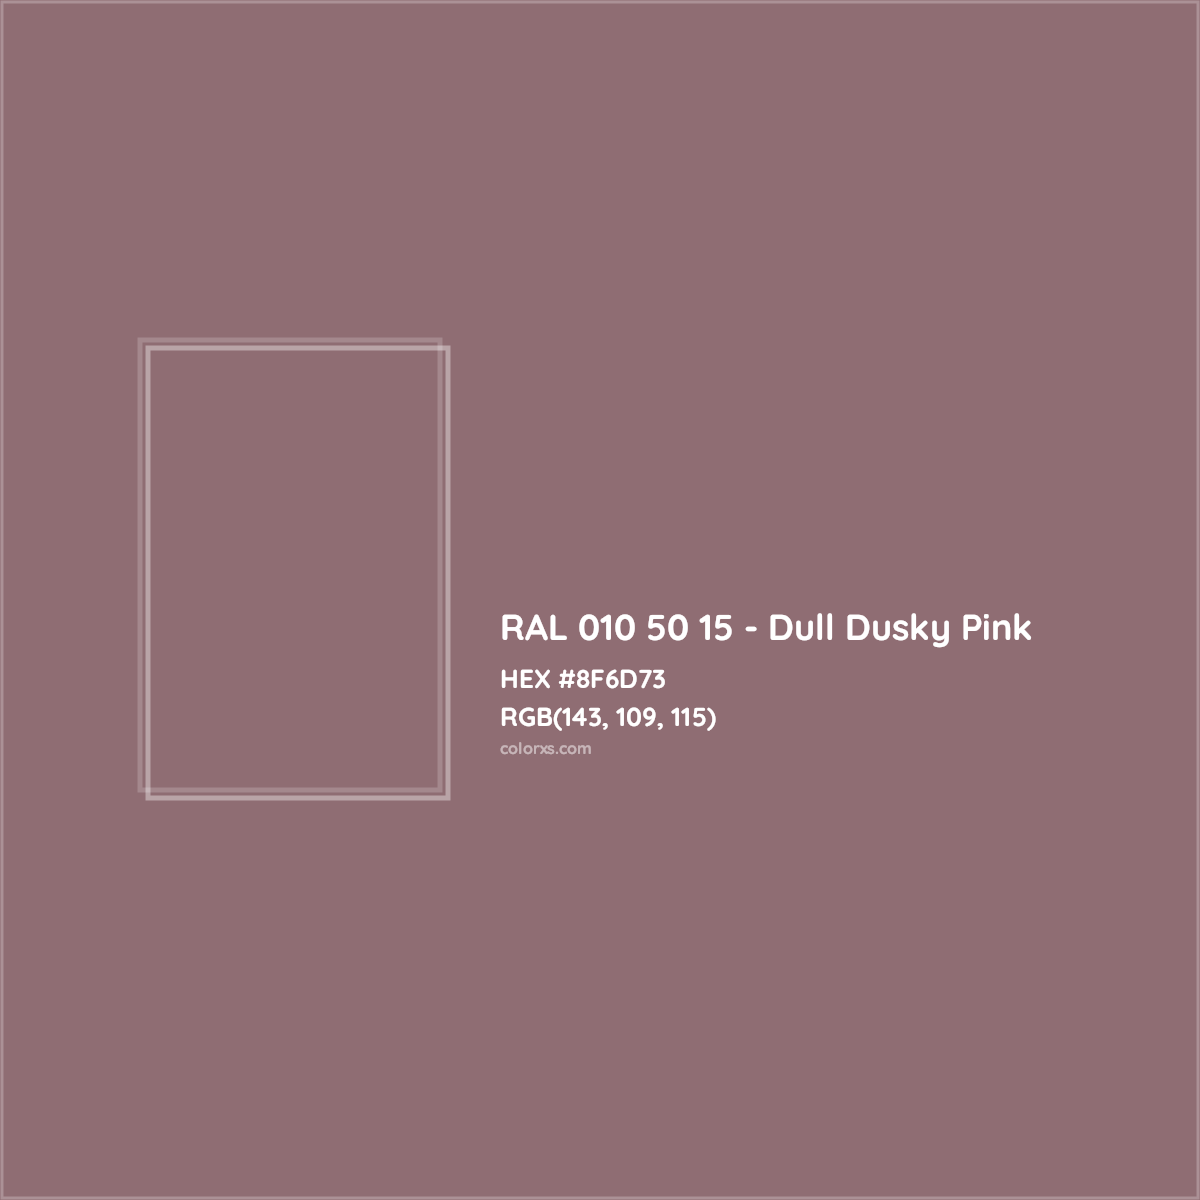 HEX #8F6D73 RAL 010 50 15 - Dull Dusky Pink CMS RAL Design - Color Code